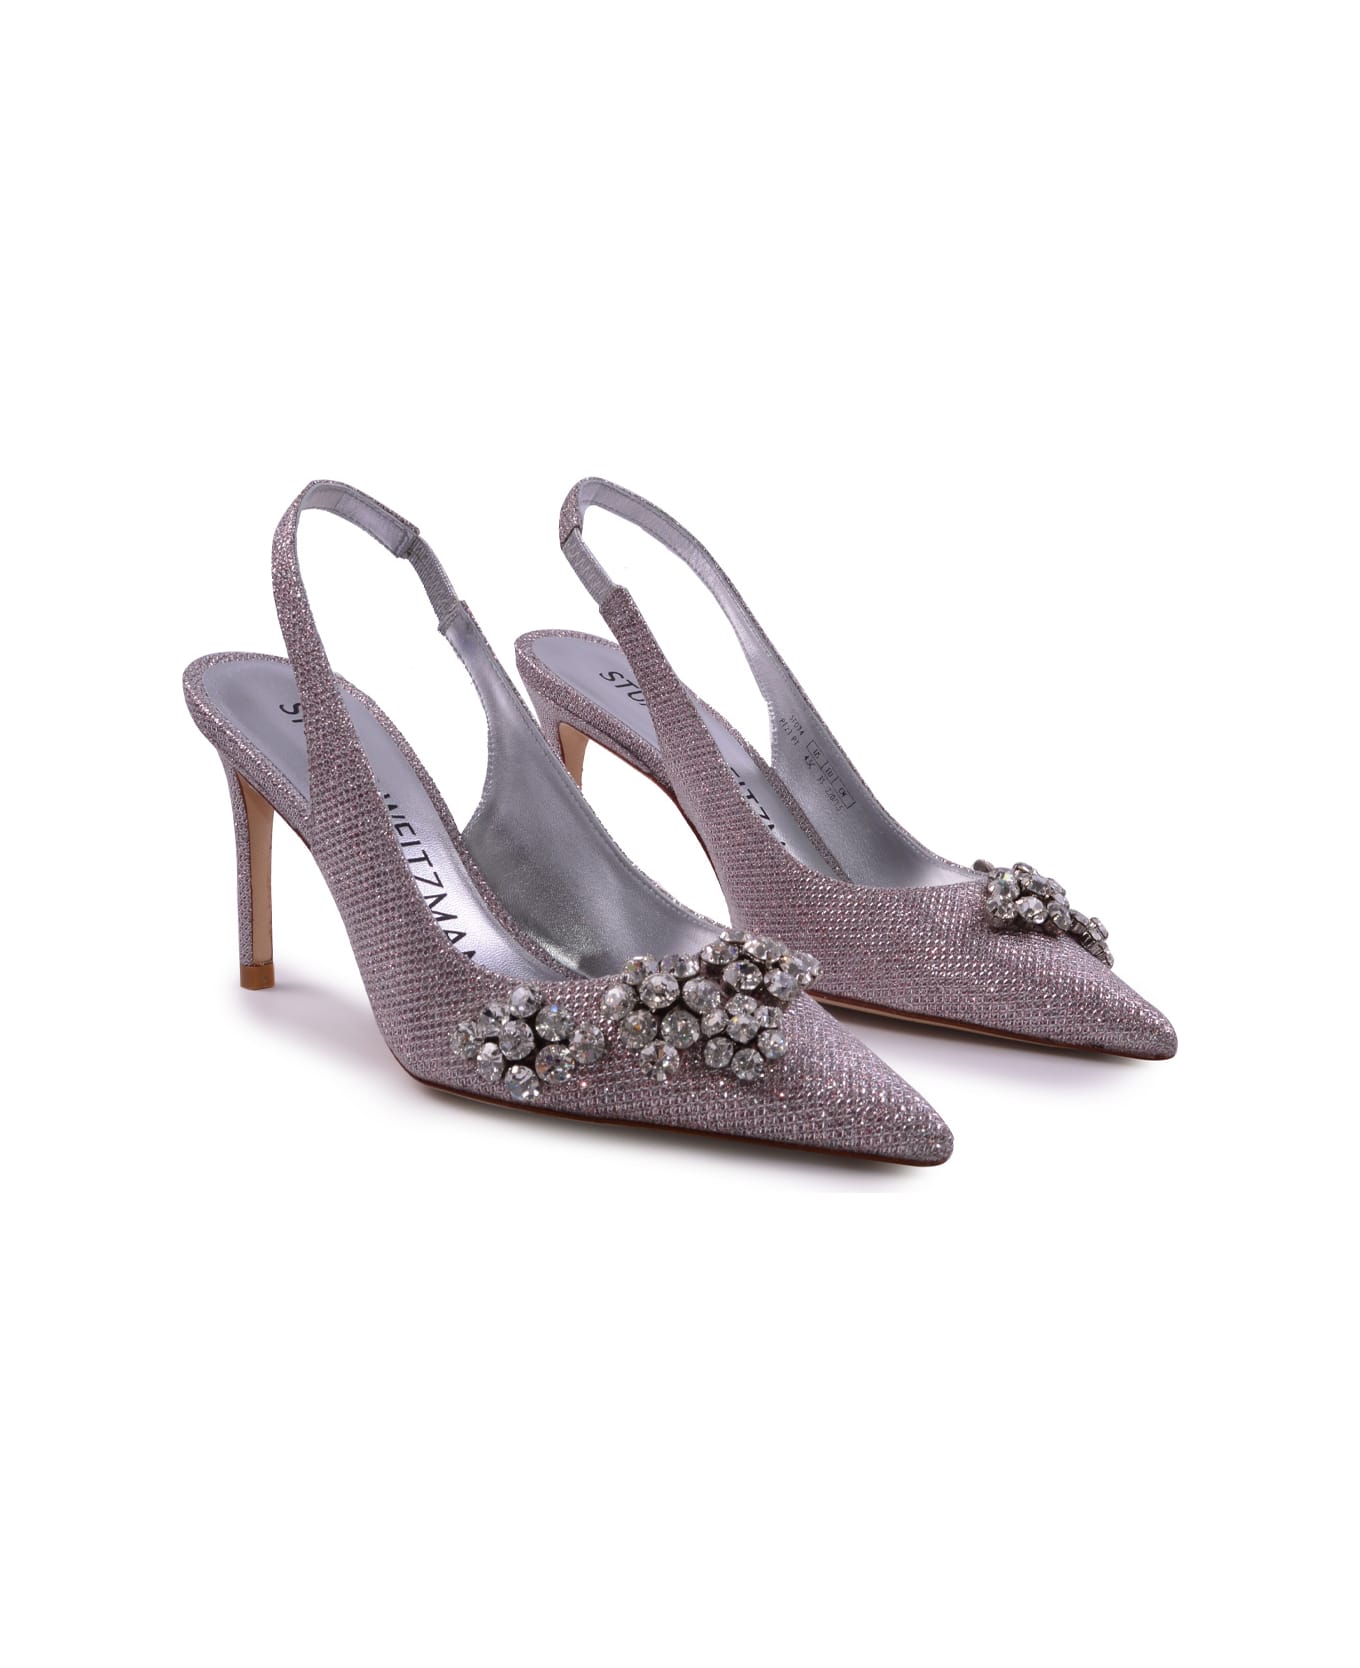 Stuart Weitzman Shoes With Heels And Crystals - Pink